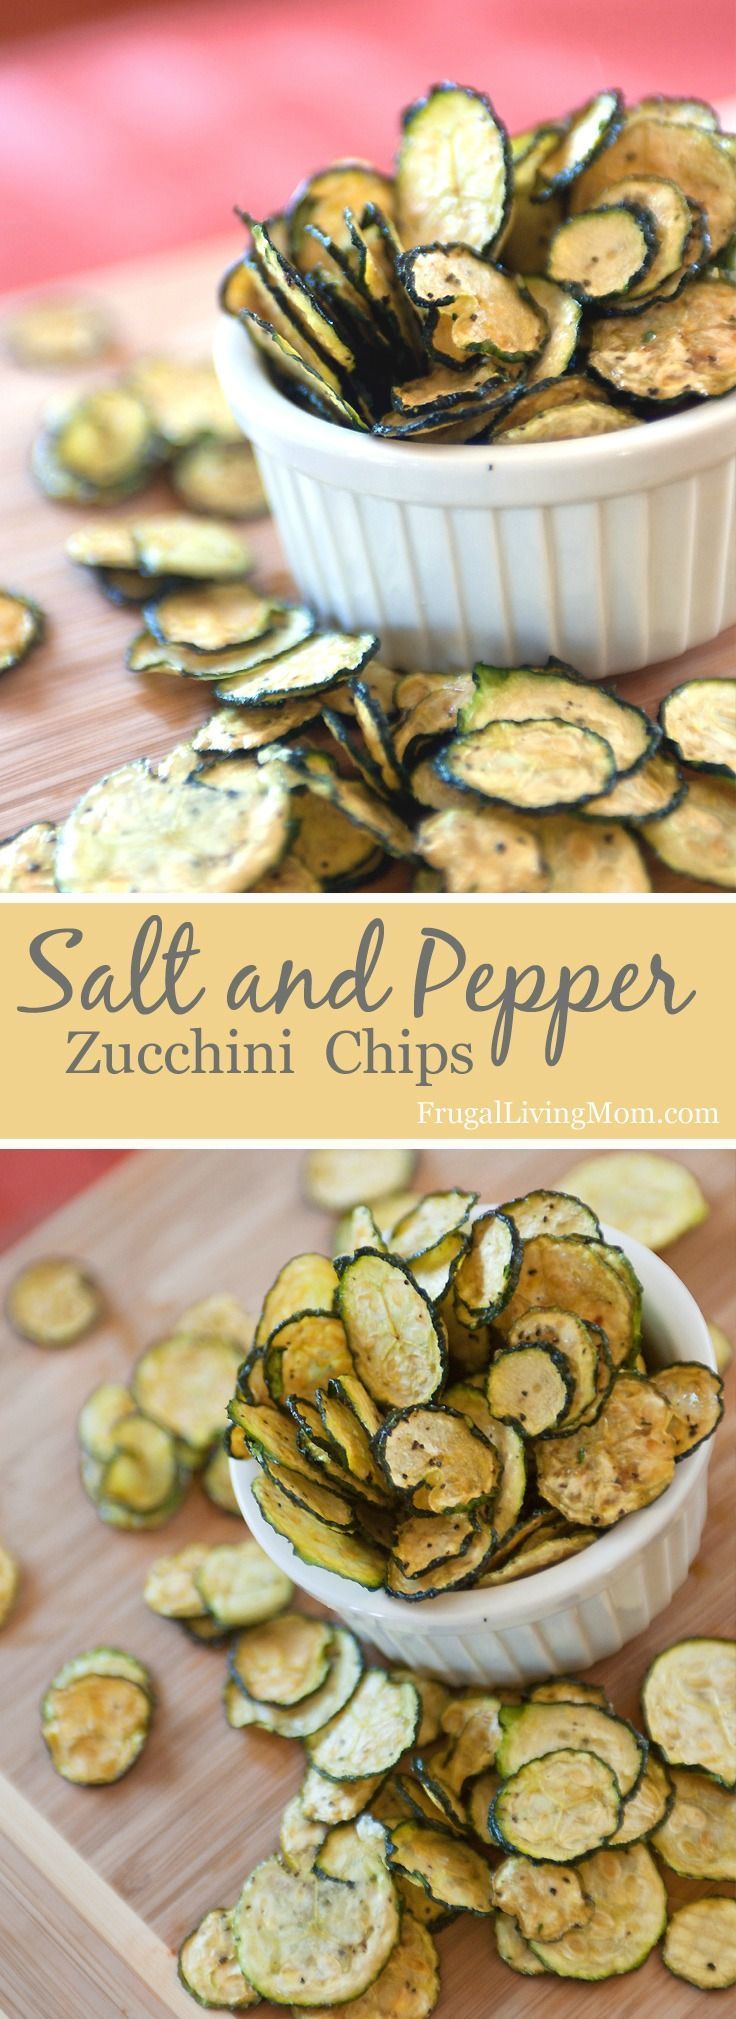 Salt and Pepper Zucchini Chips!  Super yummy and #healthy.  You can make these with a dehydrator or in the oven